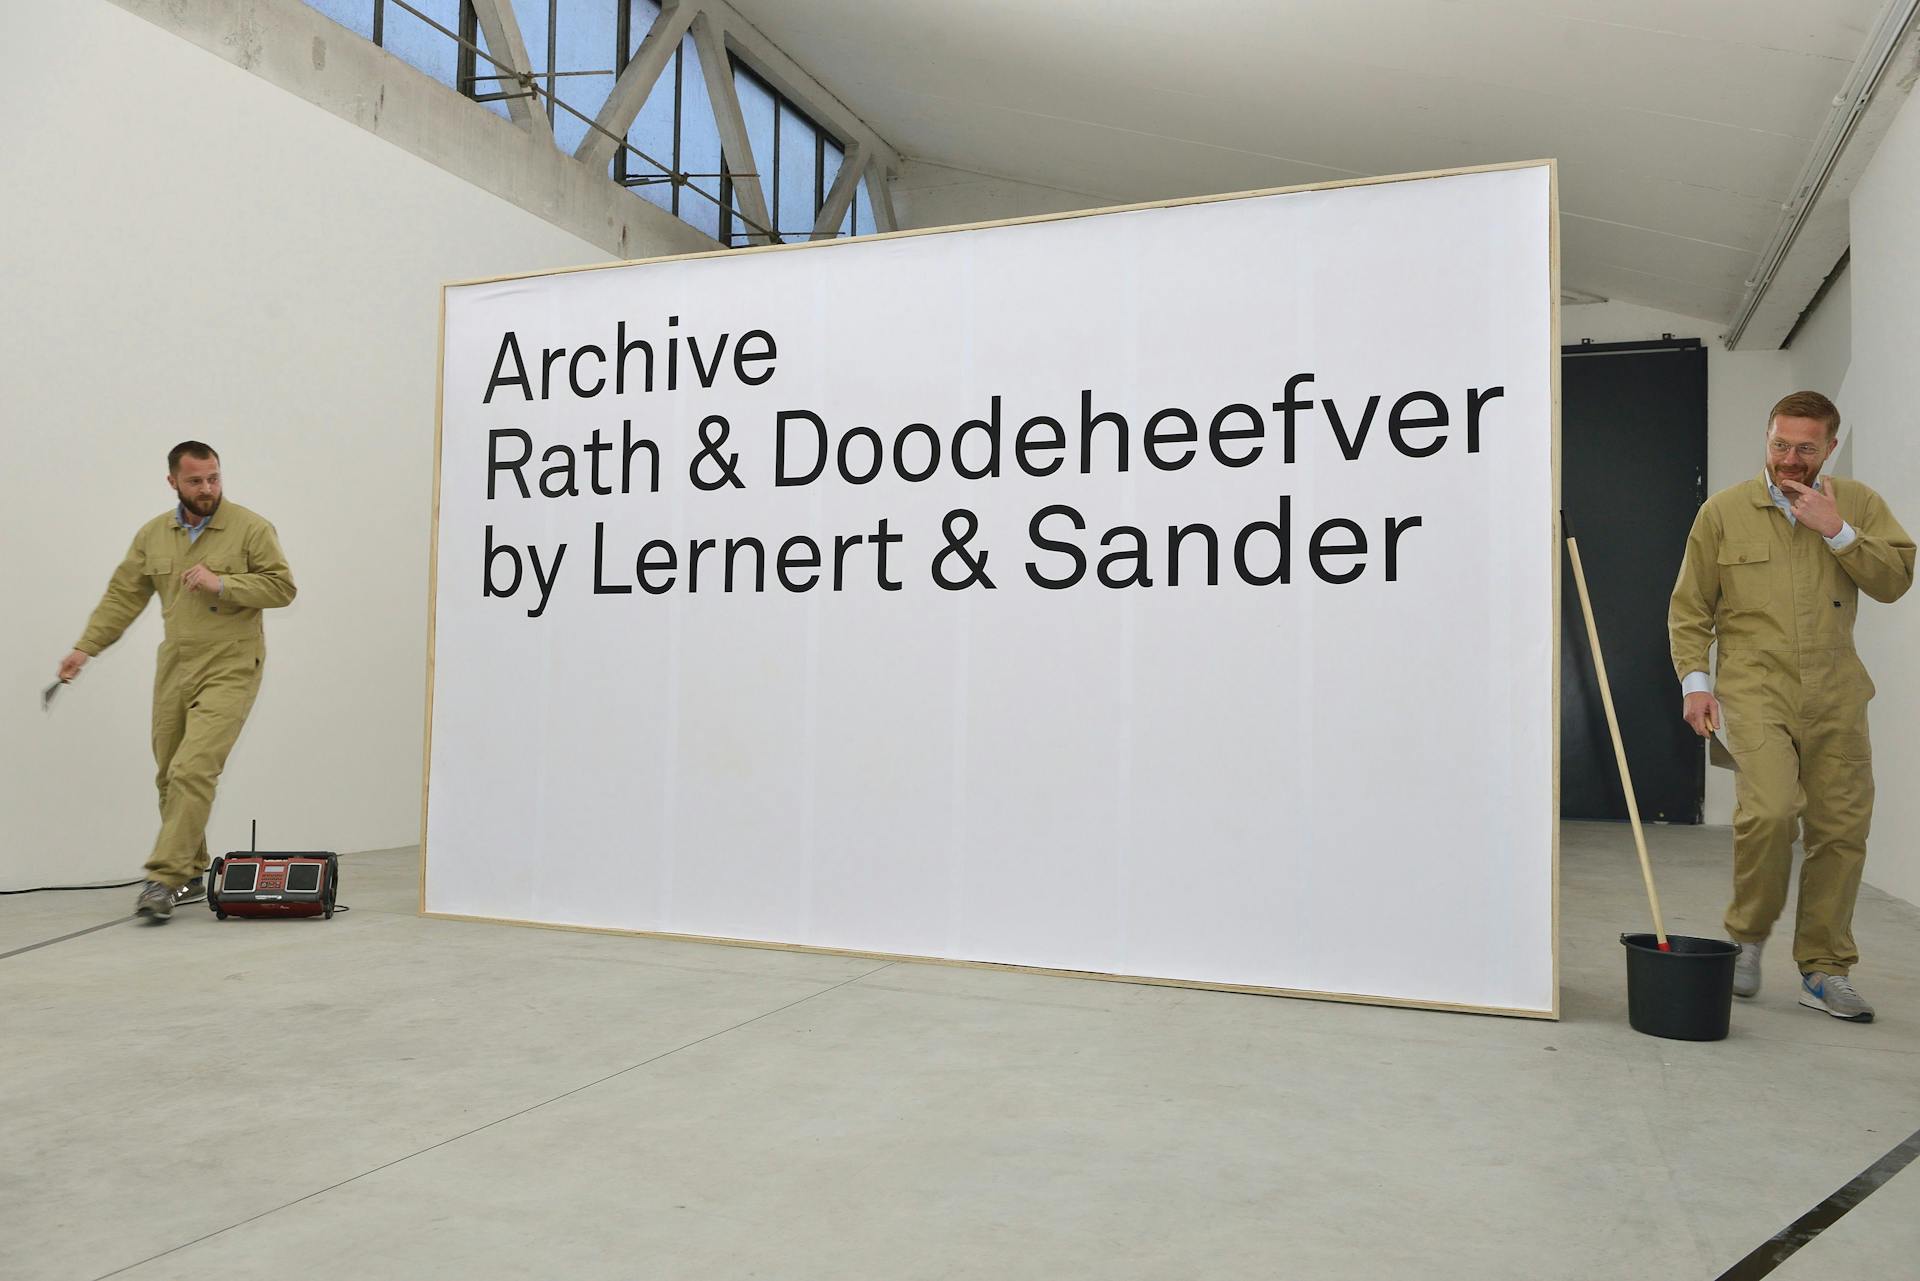  Archive Rath & Doodeheefver by Lernert & Sander. Salone di Mobile, Milaan. Photo Ilco Kemmere 